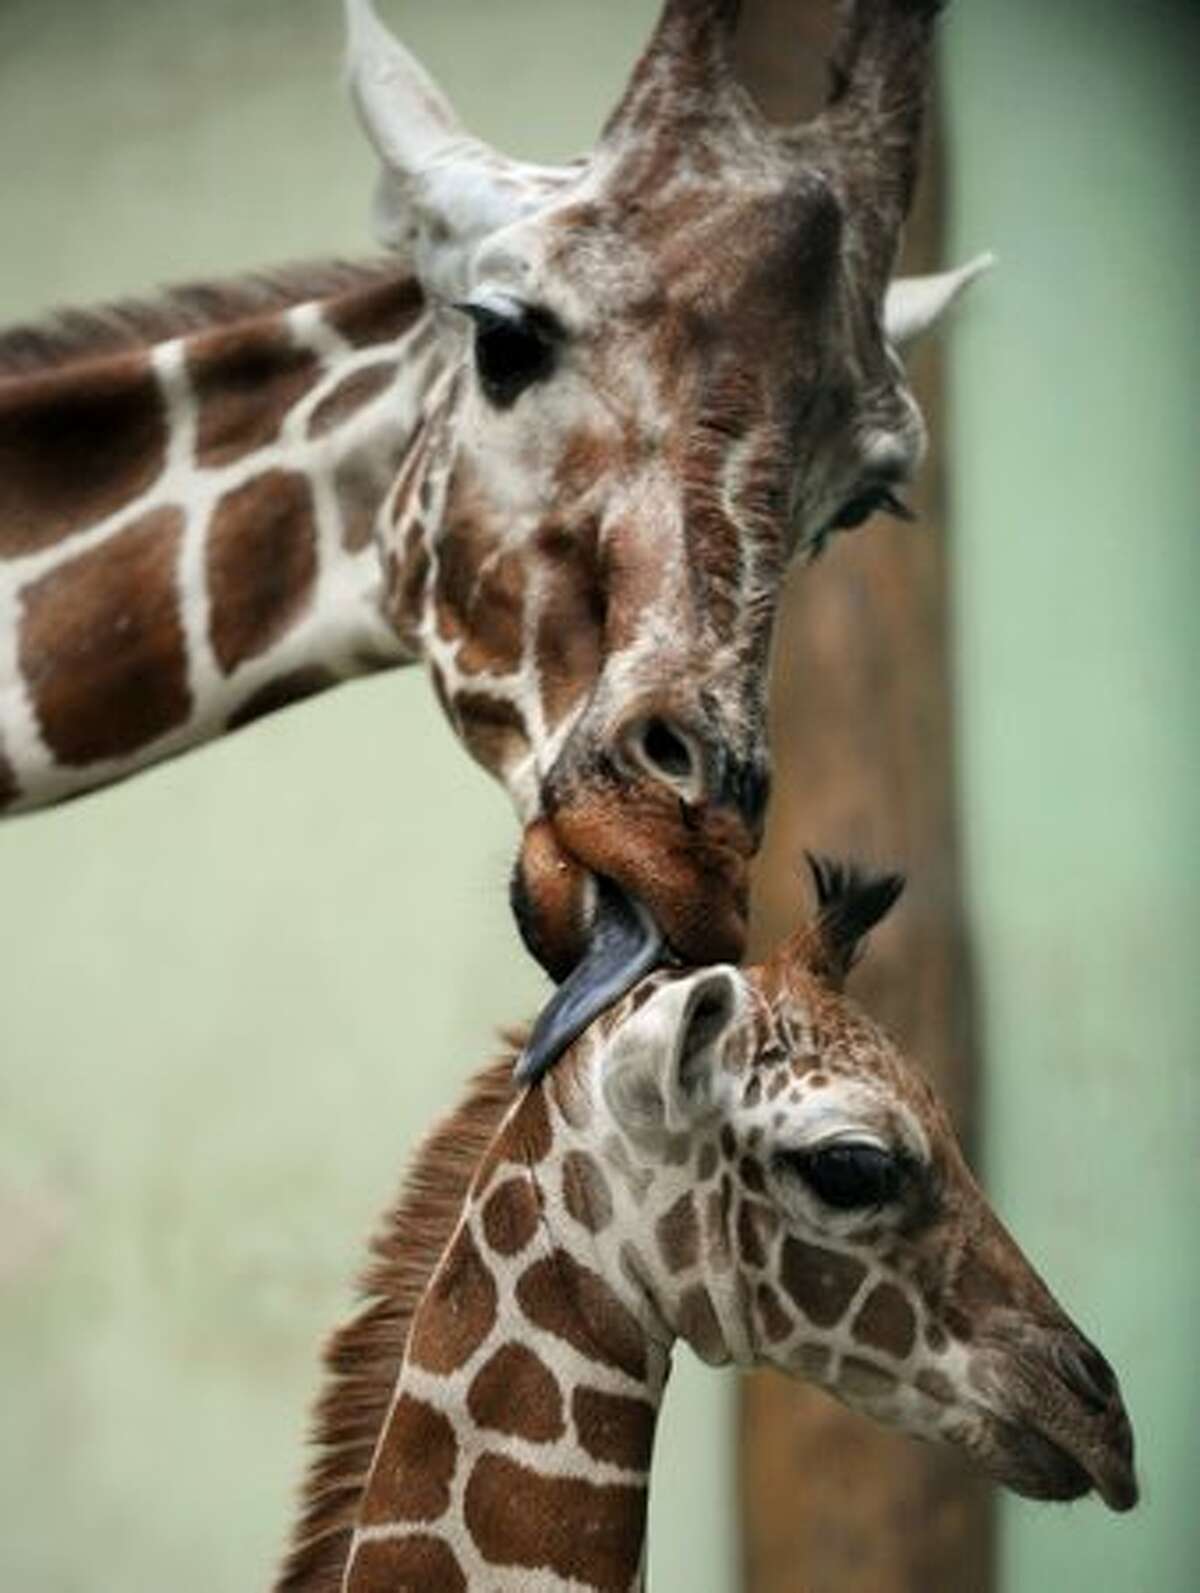 The baby giraffe "Tebogo" is licked by its mother "Monique" in their enclosure at the zoo of Frankfurt/Main, central Germany, during its presentation to the public on Wednesday.